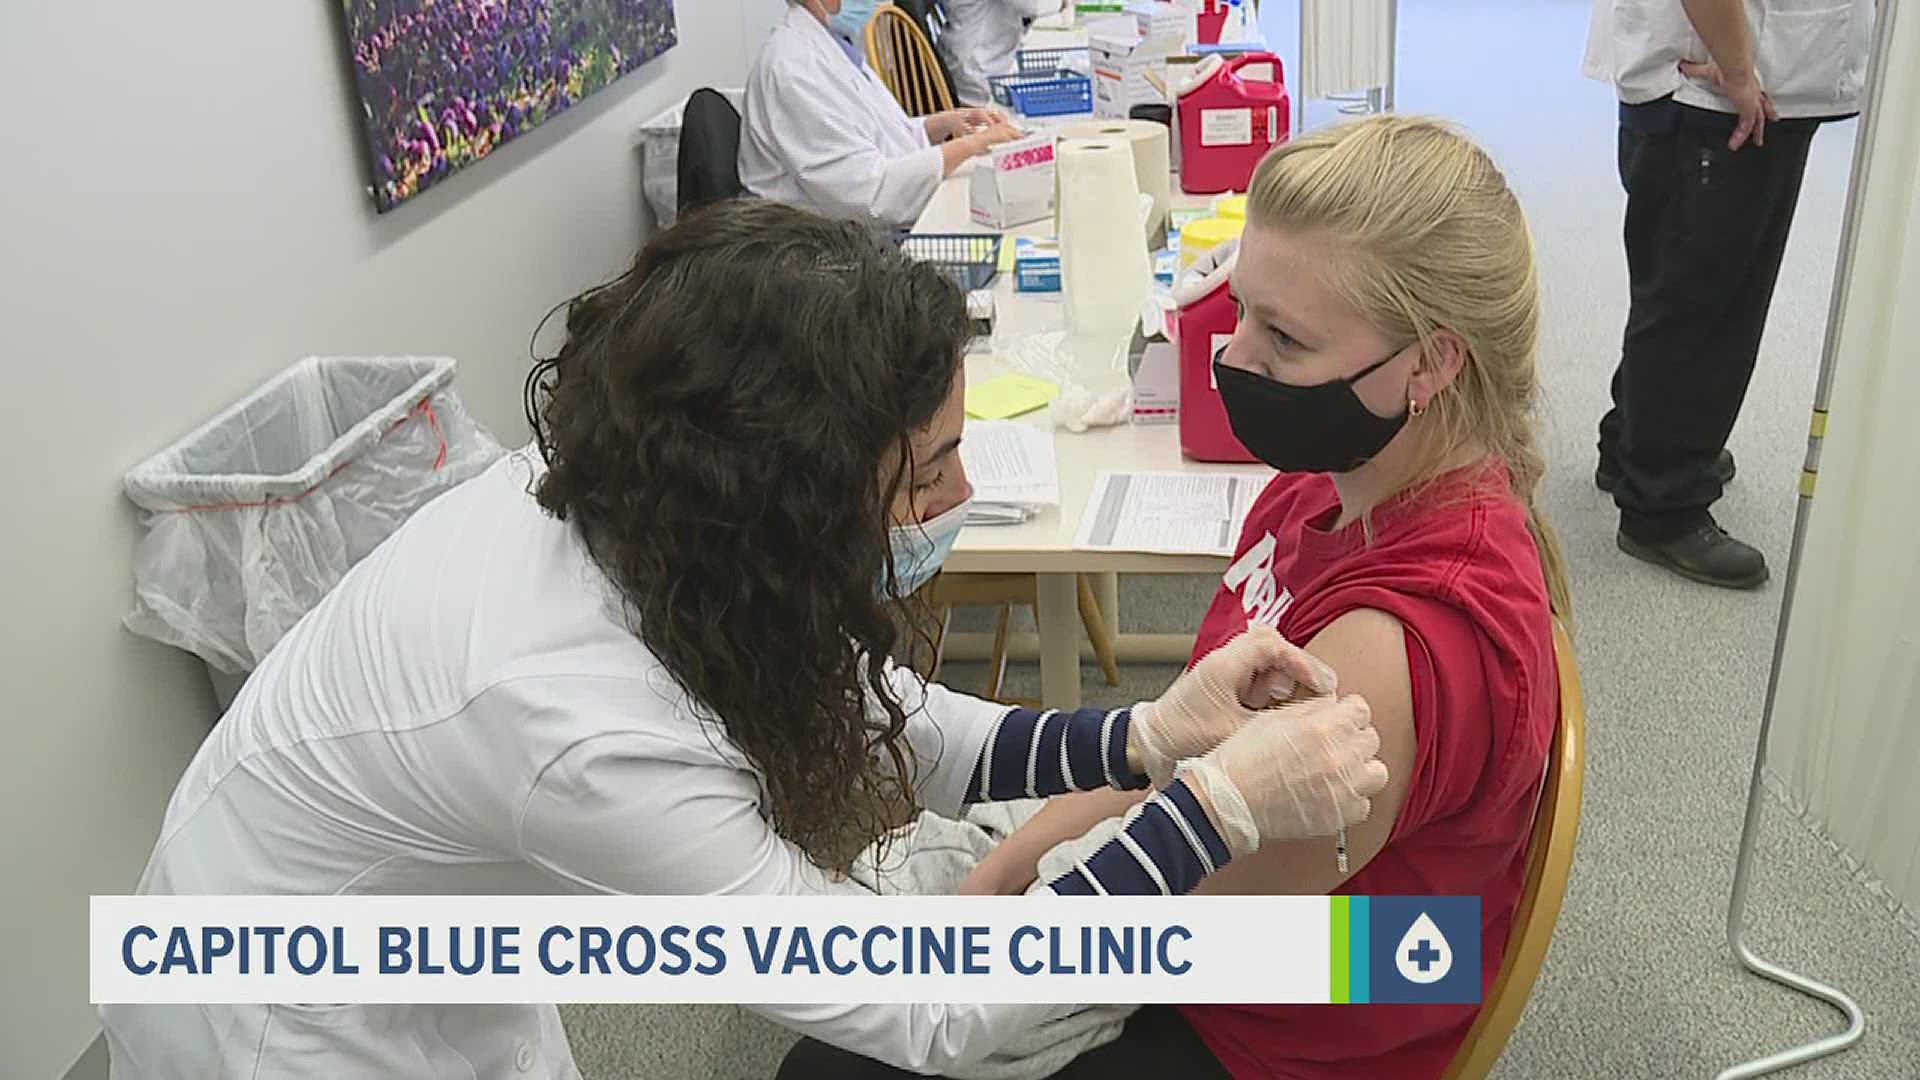 The clinic, hosted by Capitol Blue Cross and Rite Aid, is expected to provide appointment-only vaccinations to about 1,000 people through Saturday.